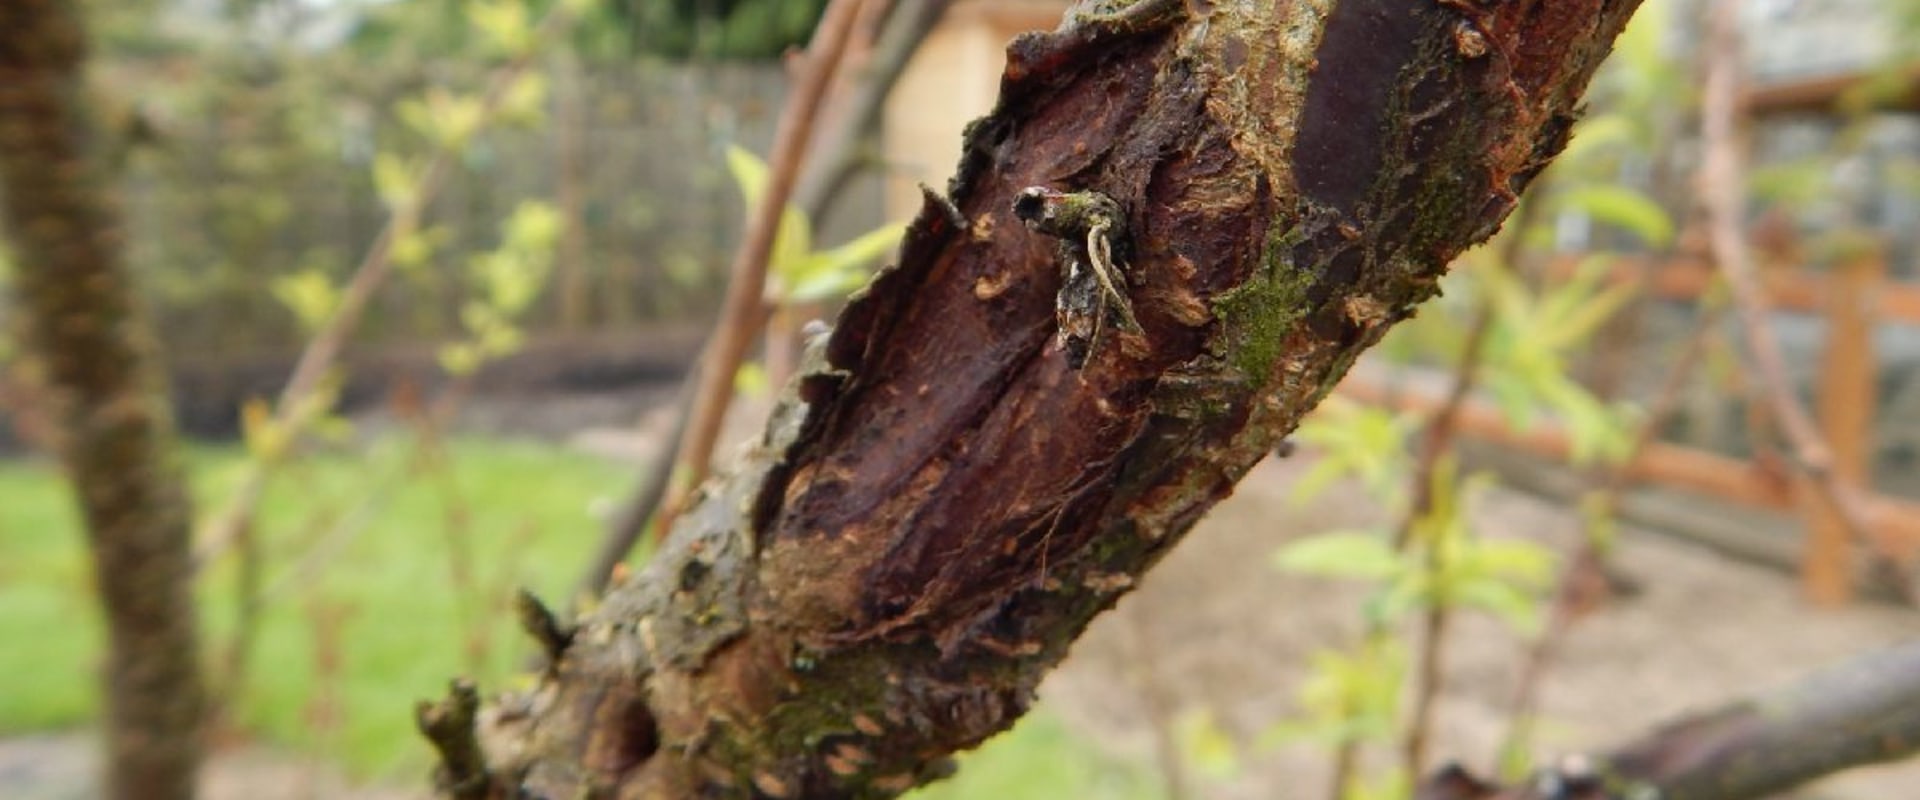 How do you prevent tree disease?